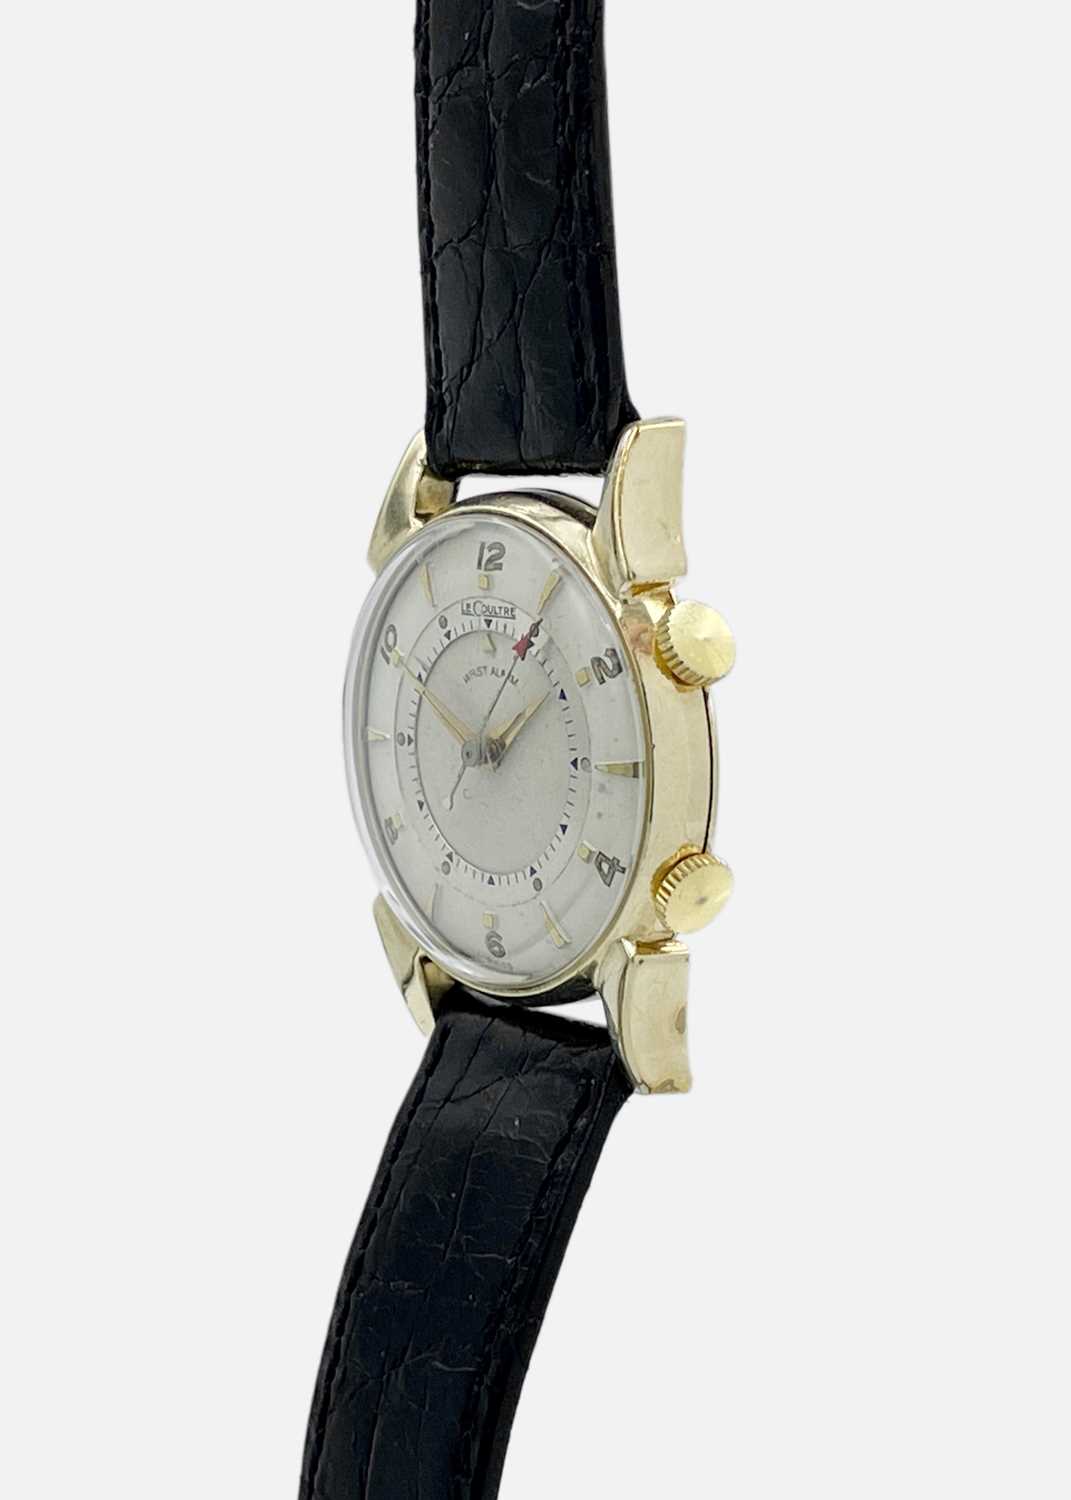 LECOULTRE - A rare LeCoultre Memovox Alarm 10k gold-filled gentleman's wristwatch. - Image 2 of 4